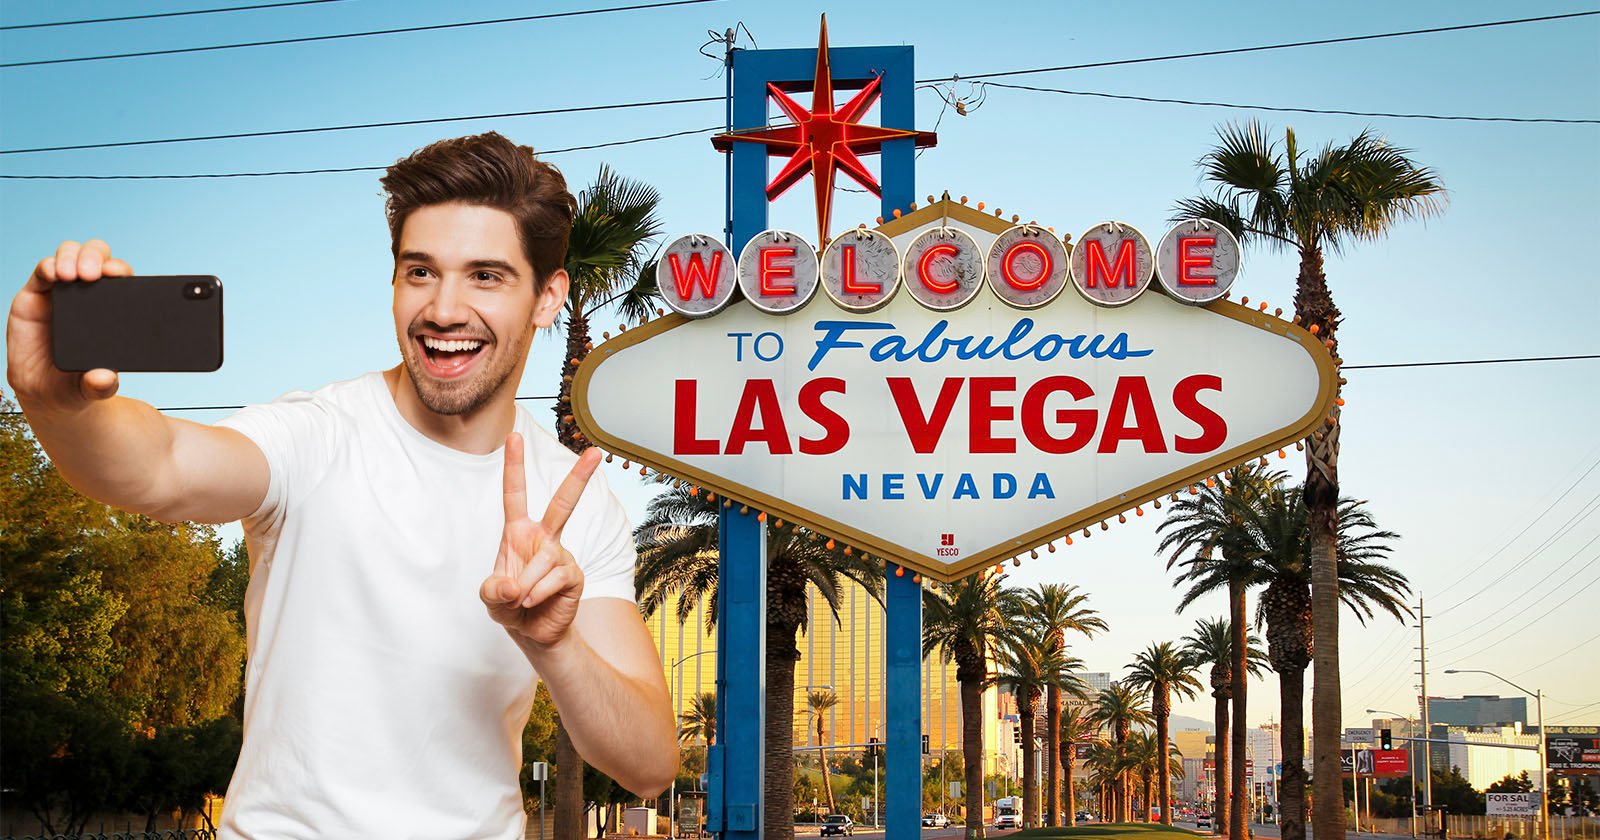 Tourists banned from stopping to take selfies in Las Vegas pedestrian bridges